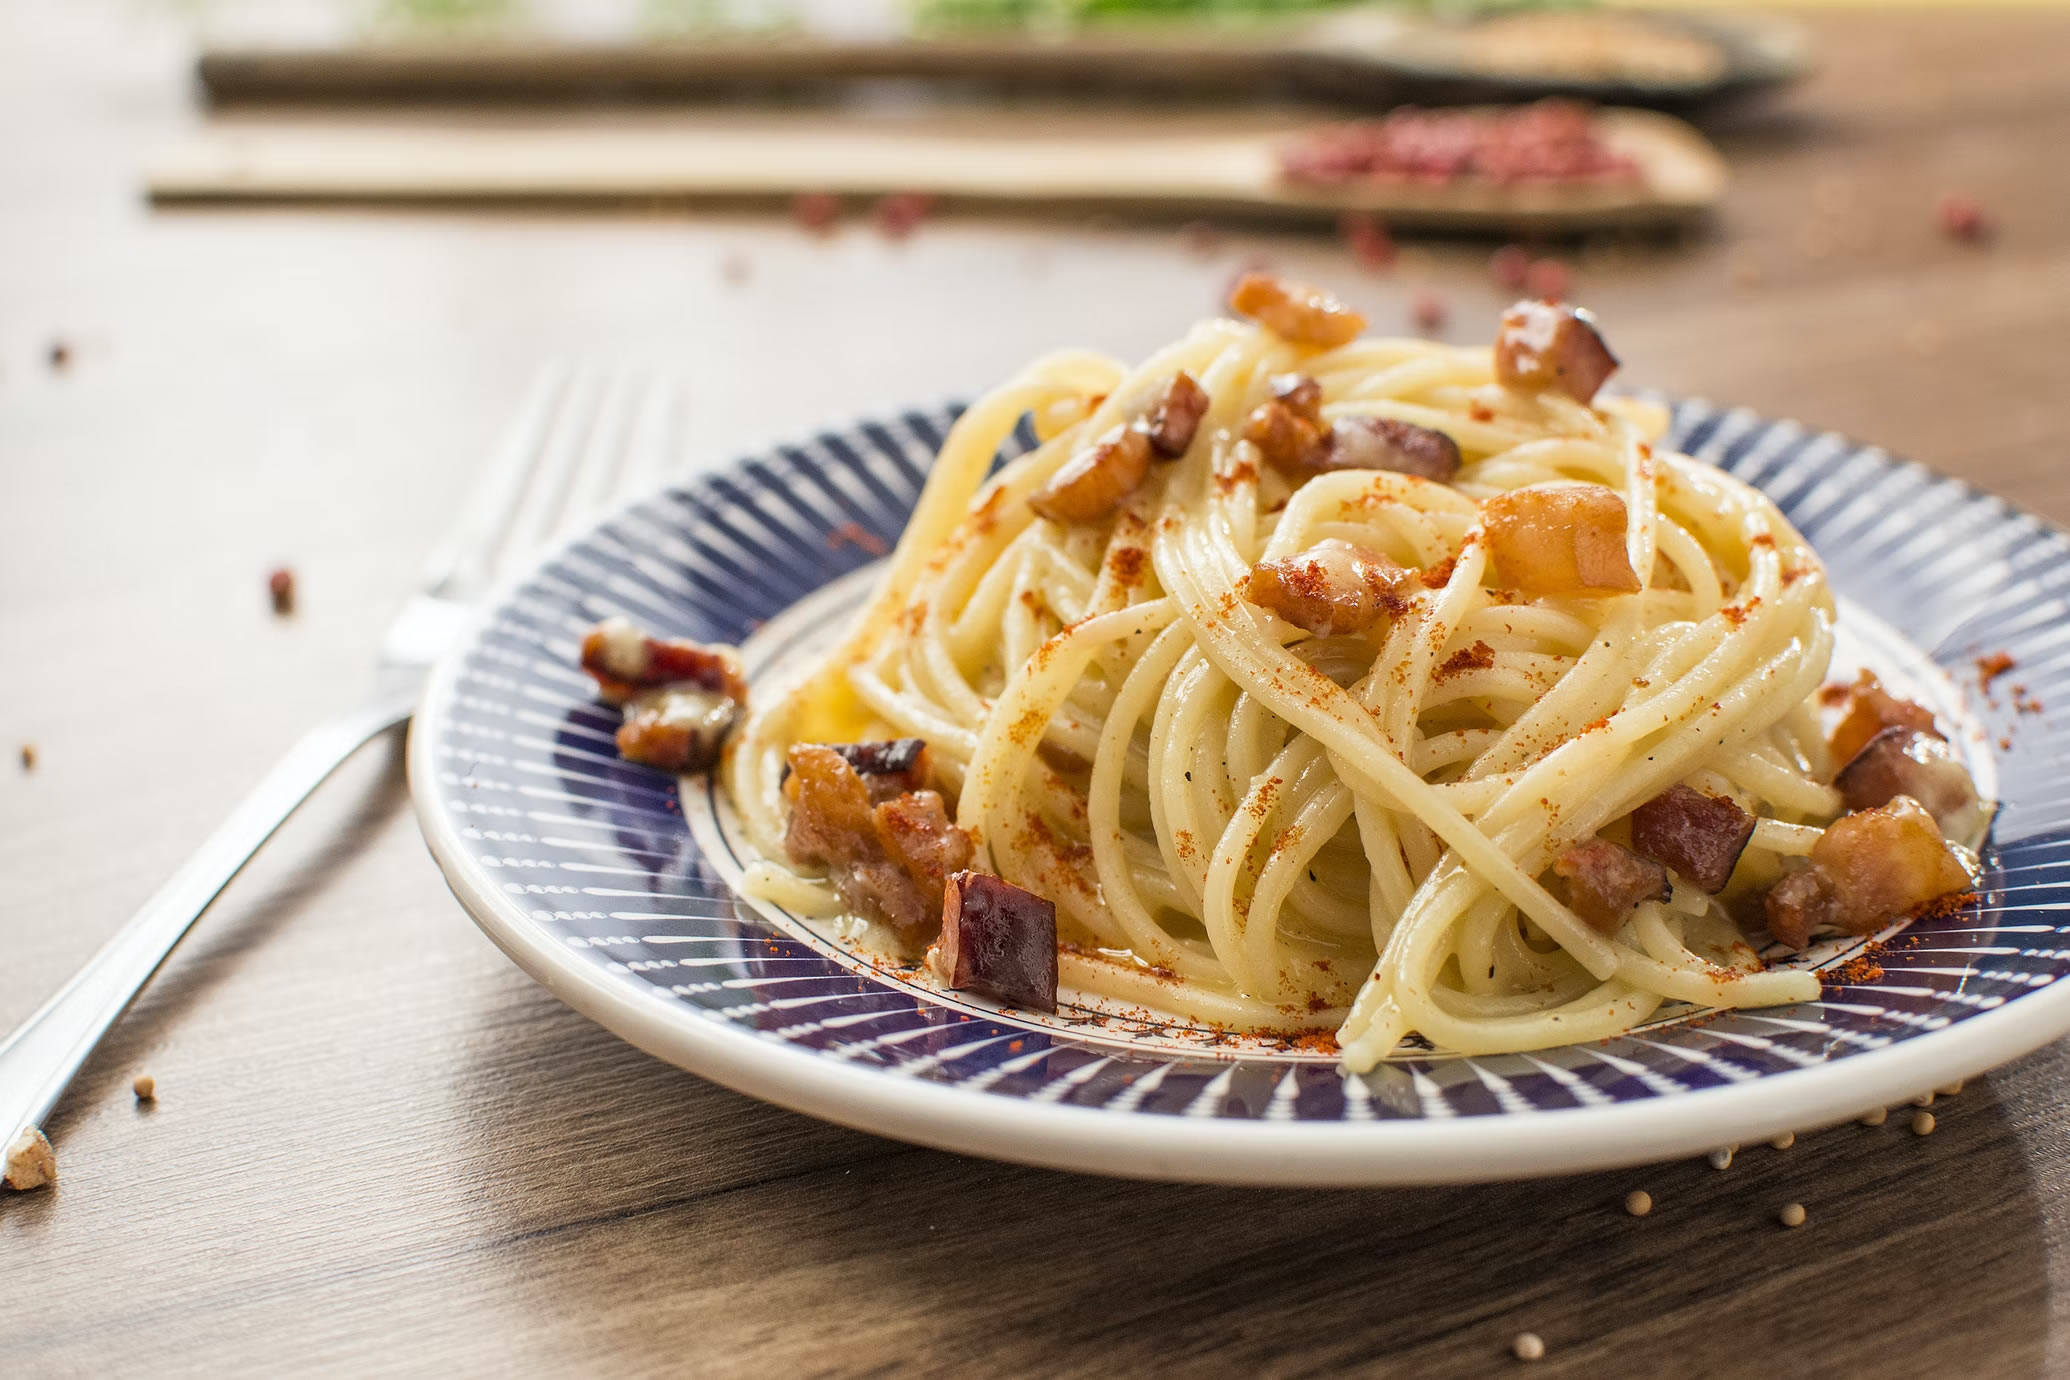 Spaghetti alla Carbonara with red paprika instead of black pepper